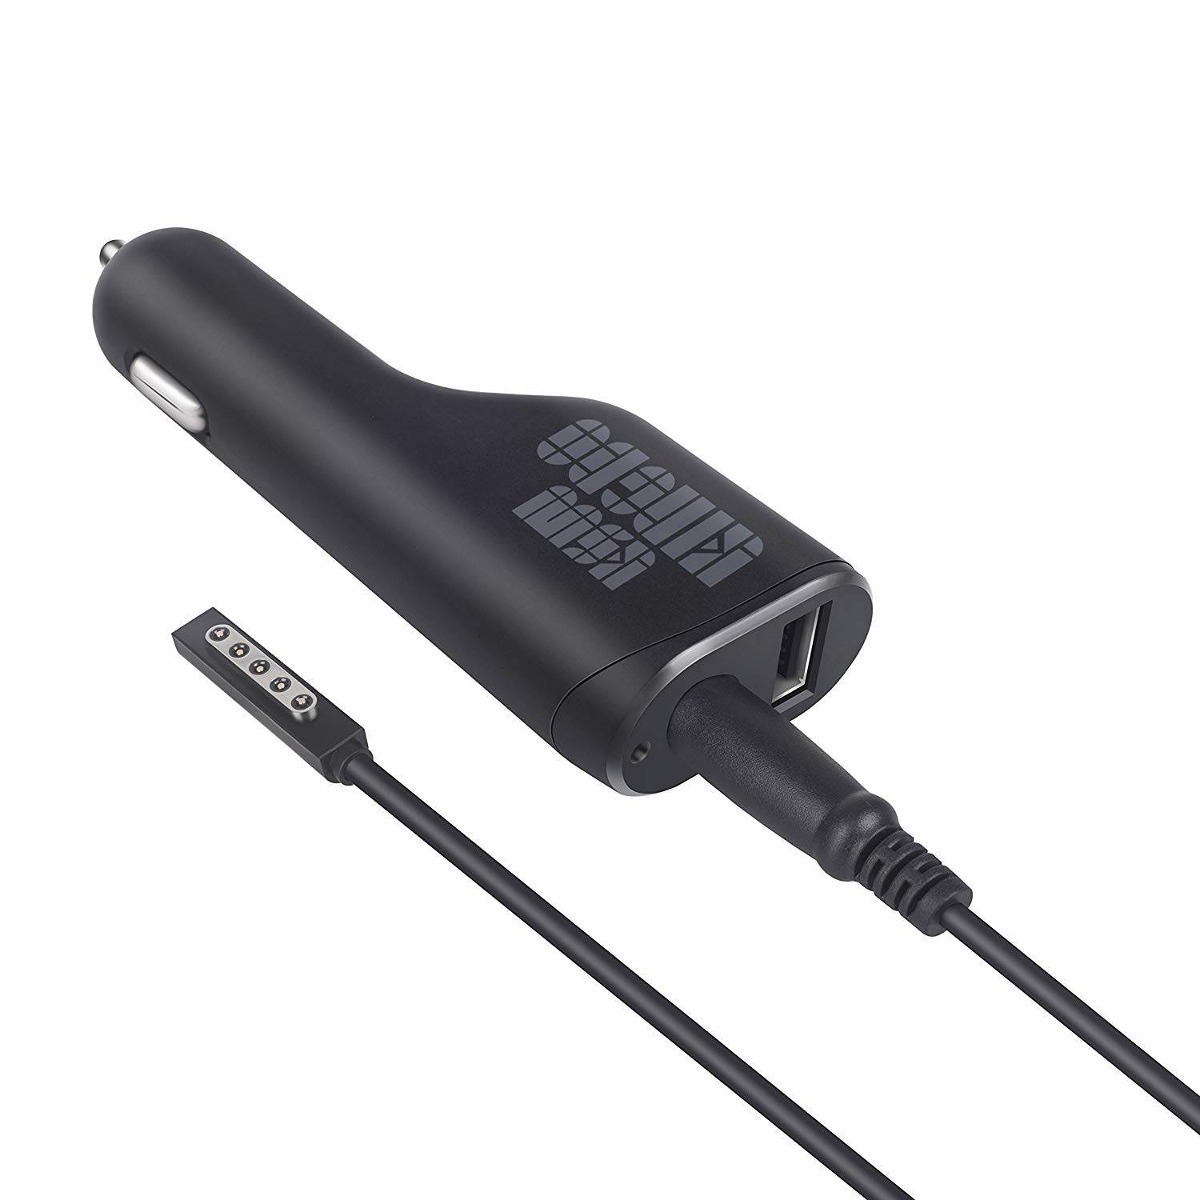 48W Power Supply Charger Adapter For Microsoft Surface 2 /& Pro 2 Surface RT USB